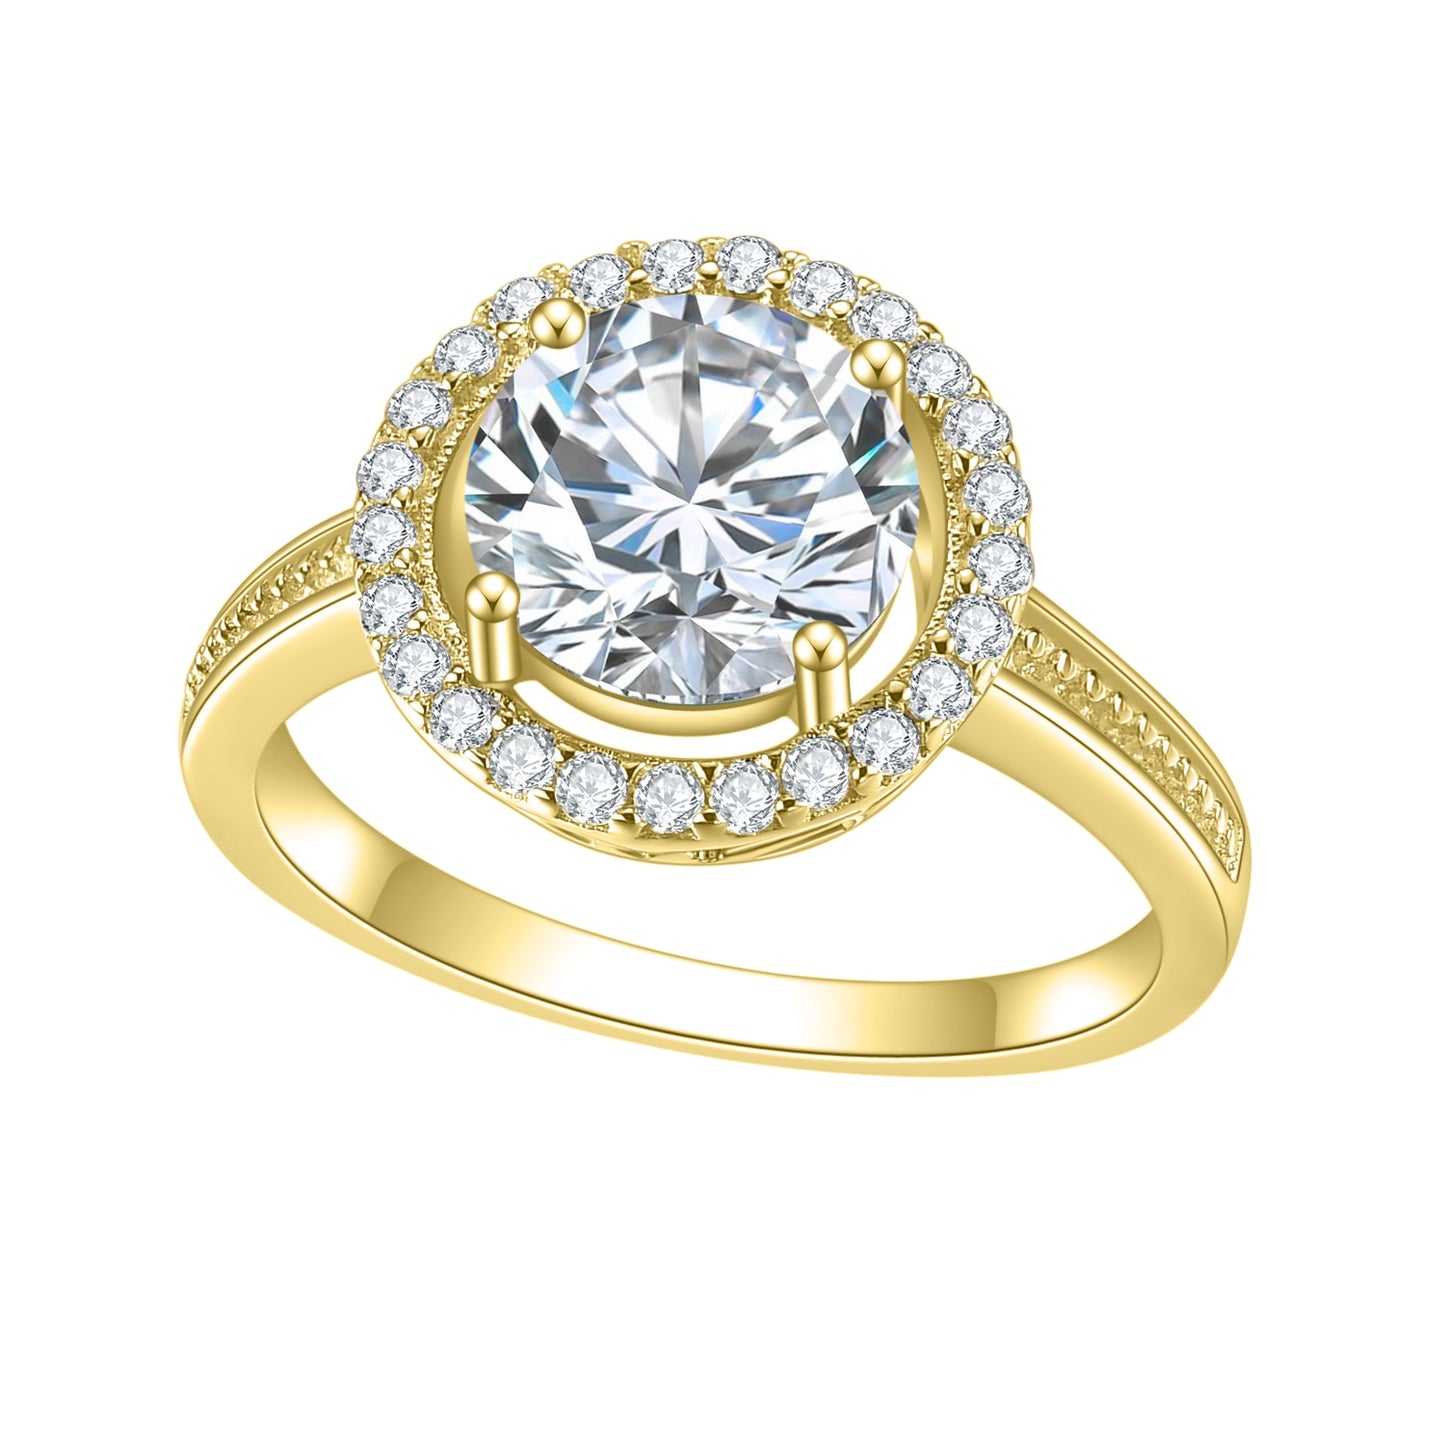 A gold halo ring set with a 2CT round moissanite encircled by a clear gem halo and set on a textured band.